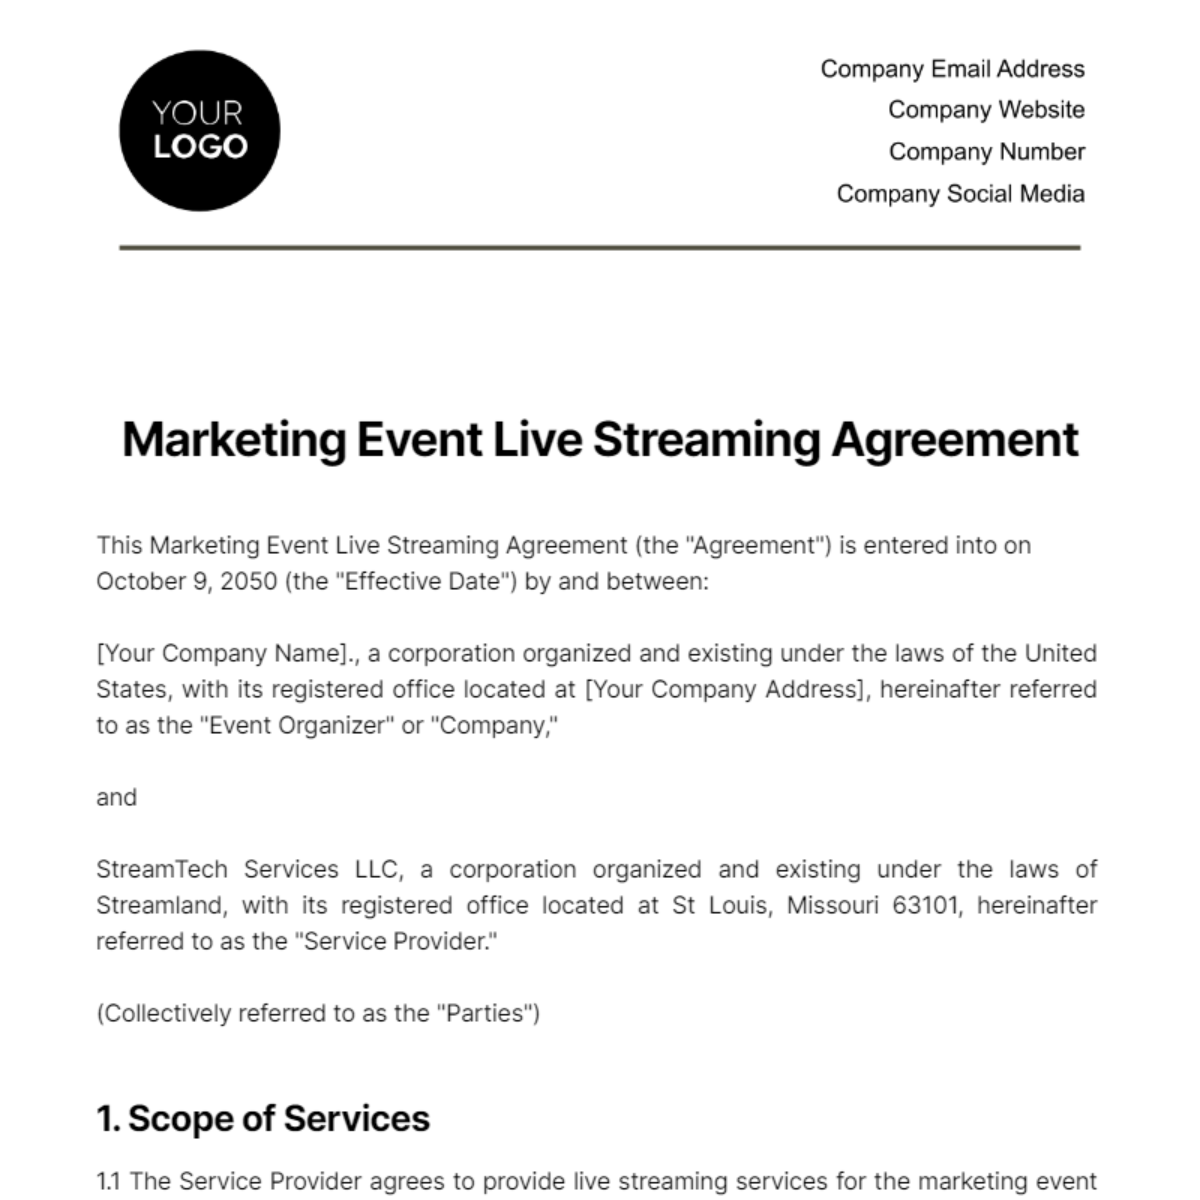 Marketing Event Live Streaming Agreement Template